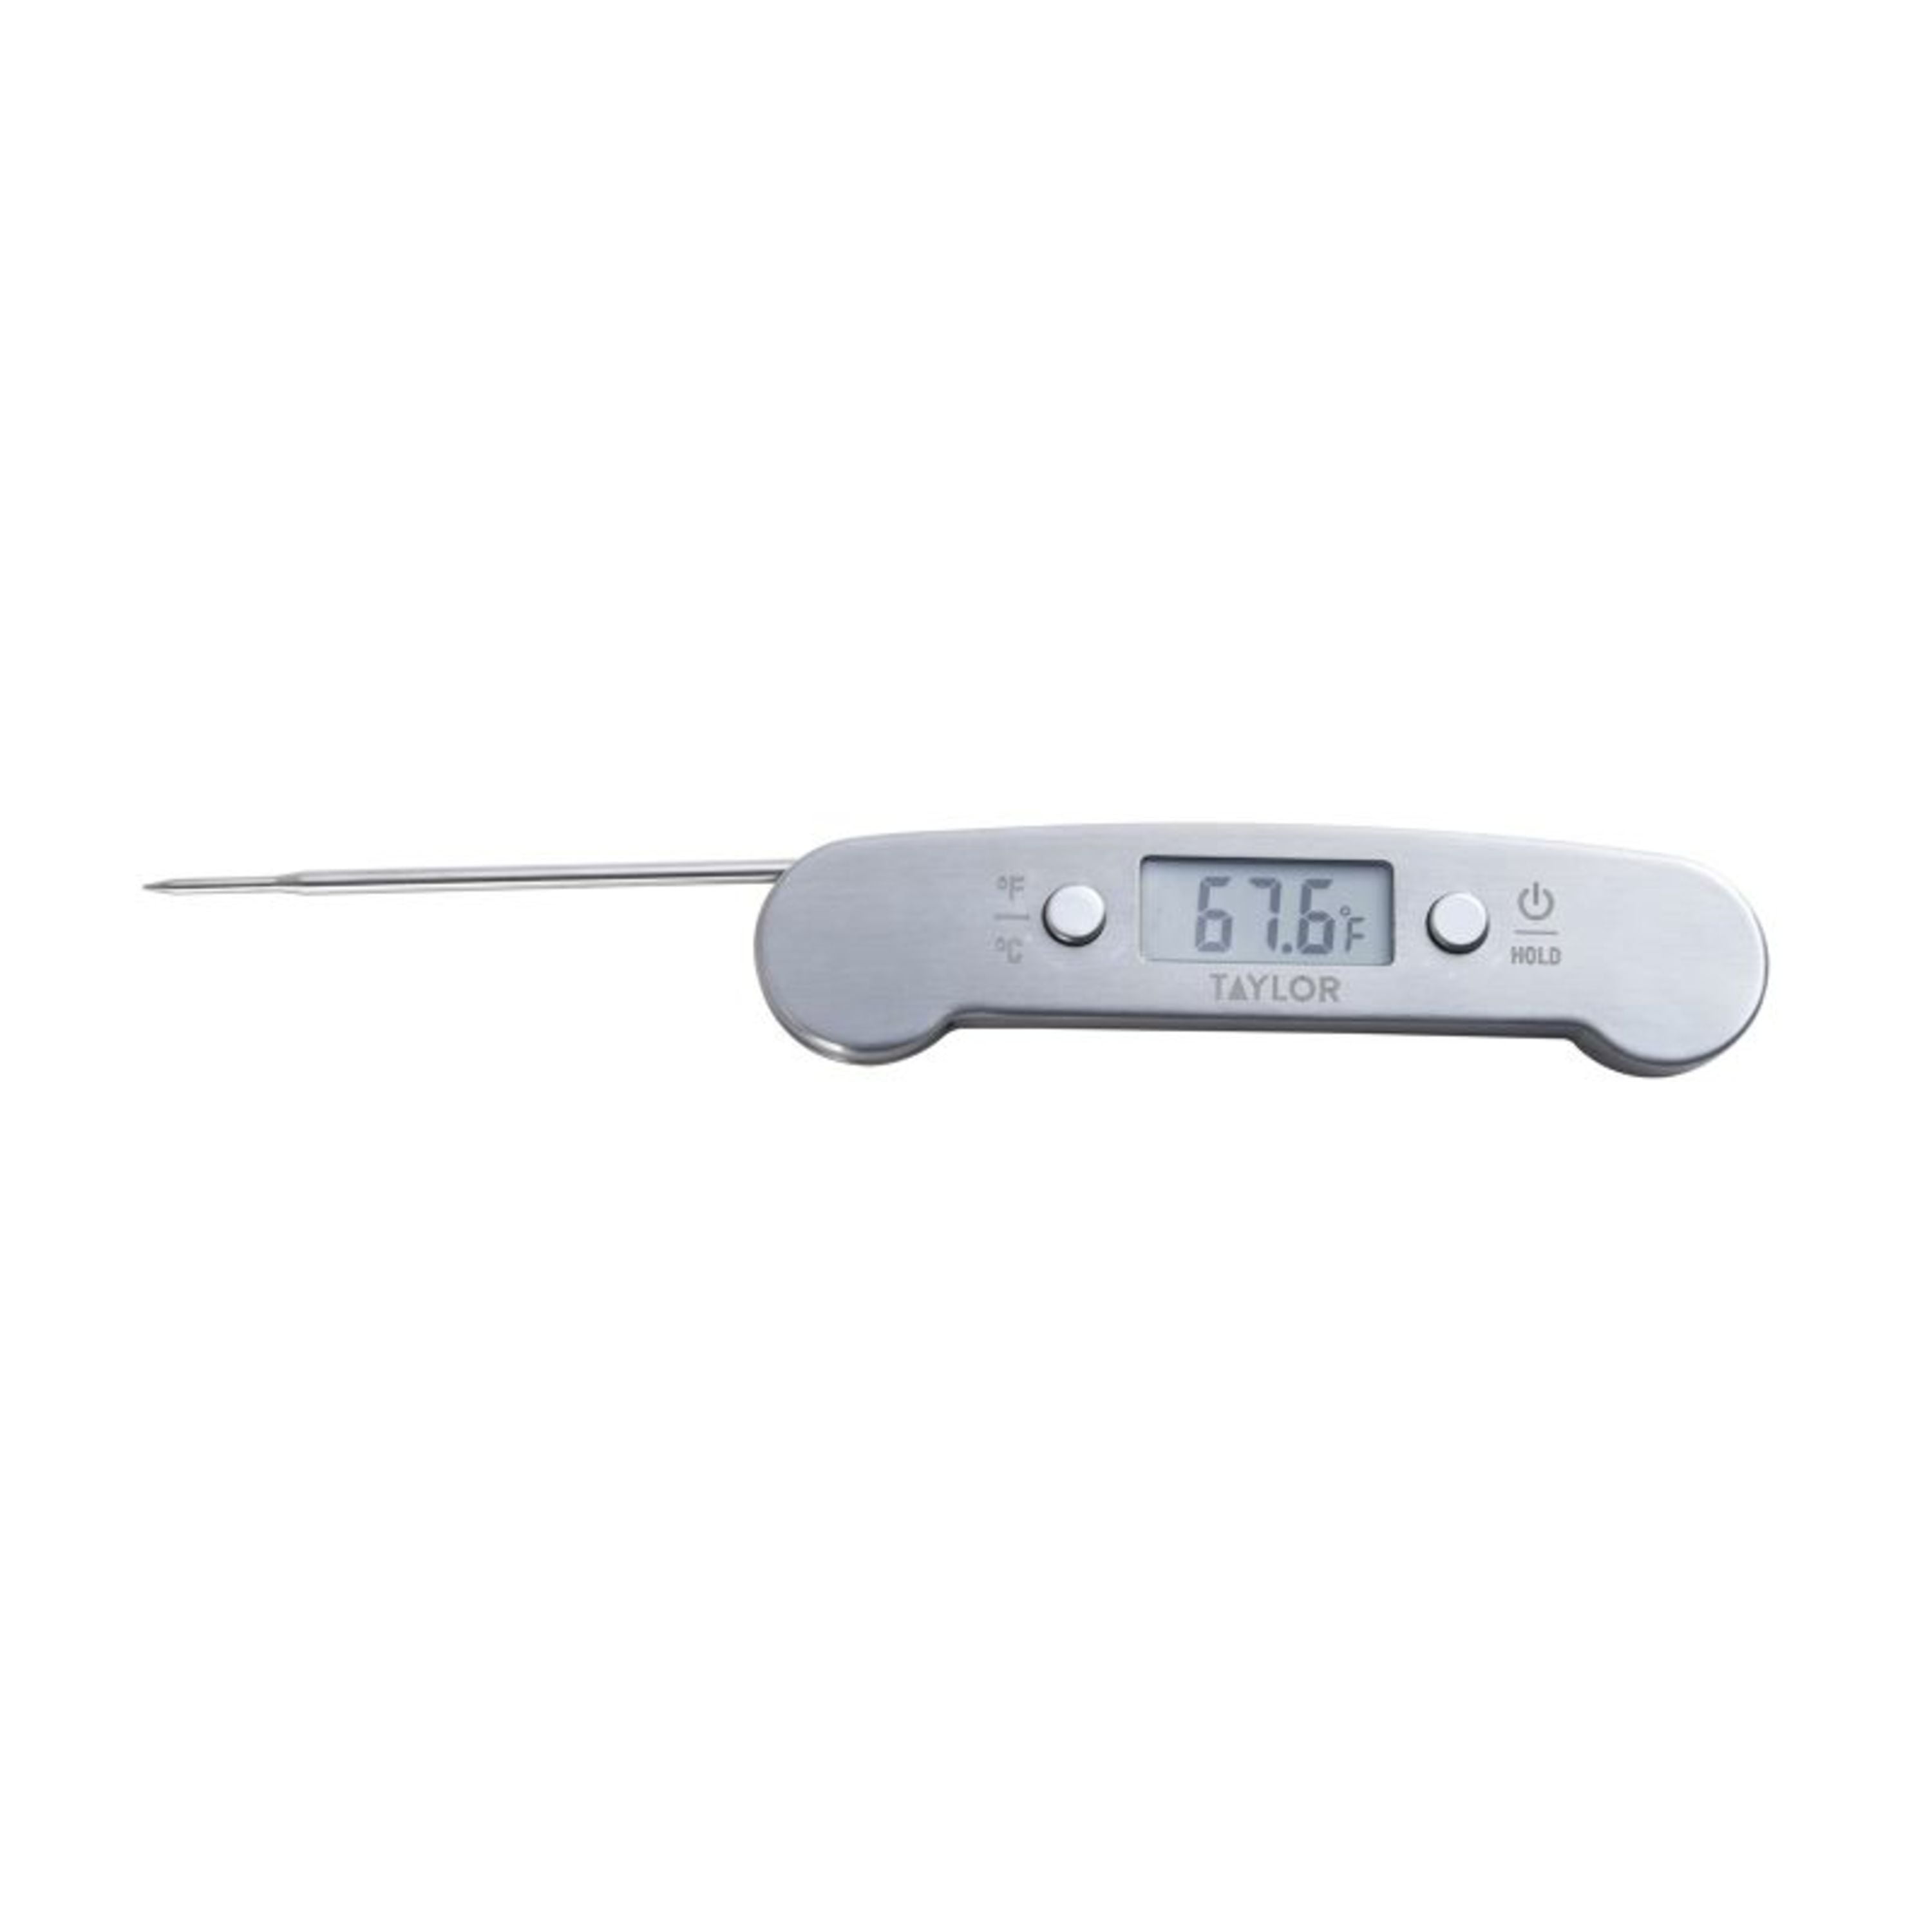 ThermoWorks RT610B Waterproof Digital Thermometer Review